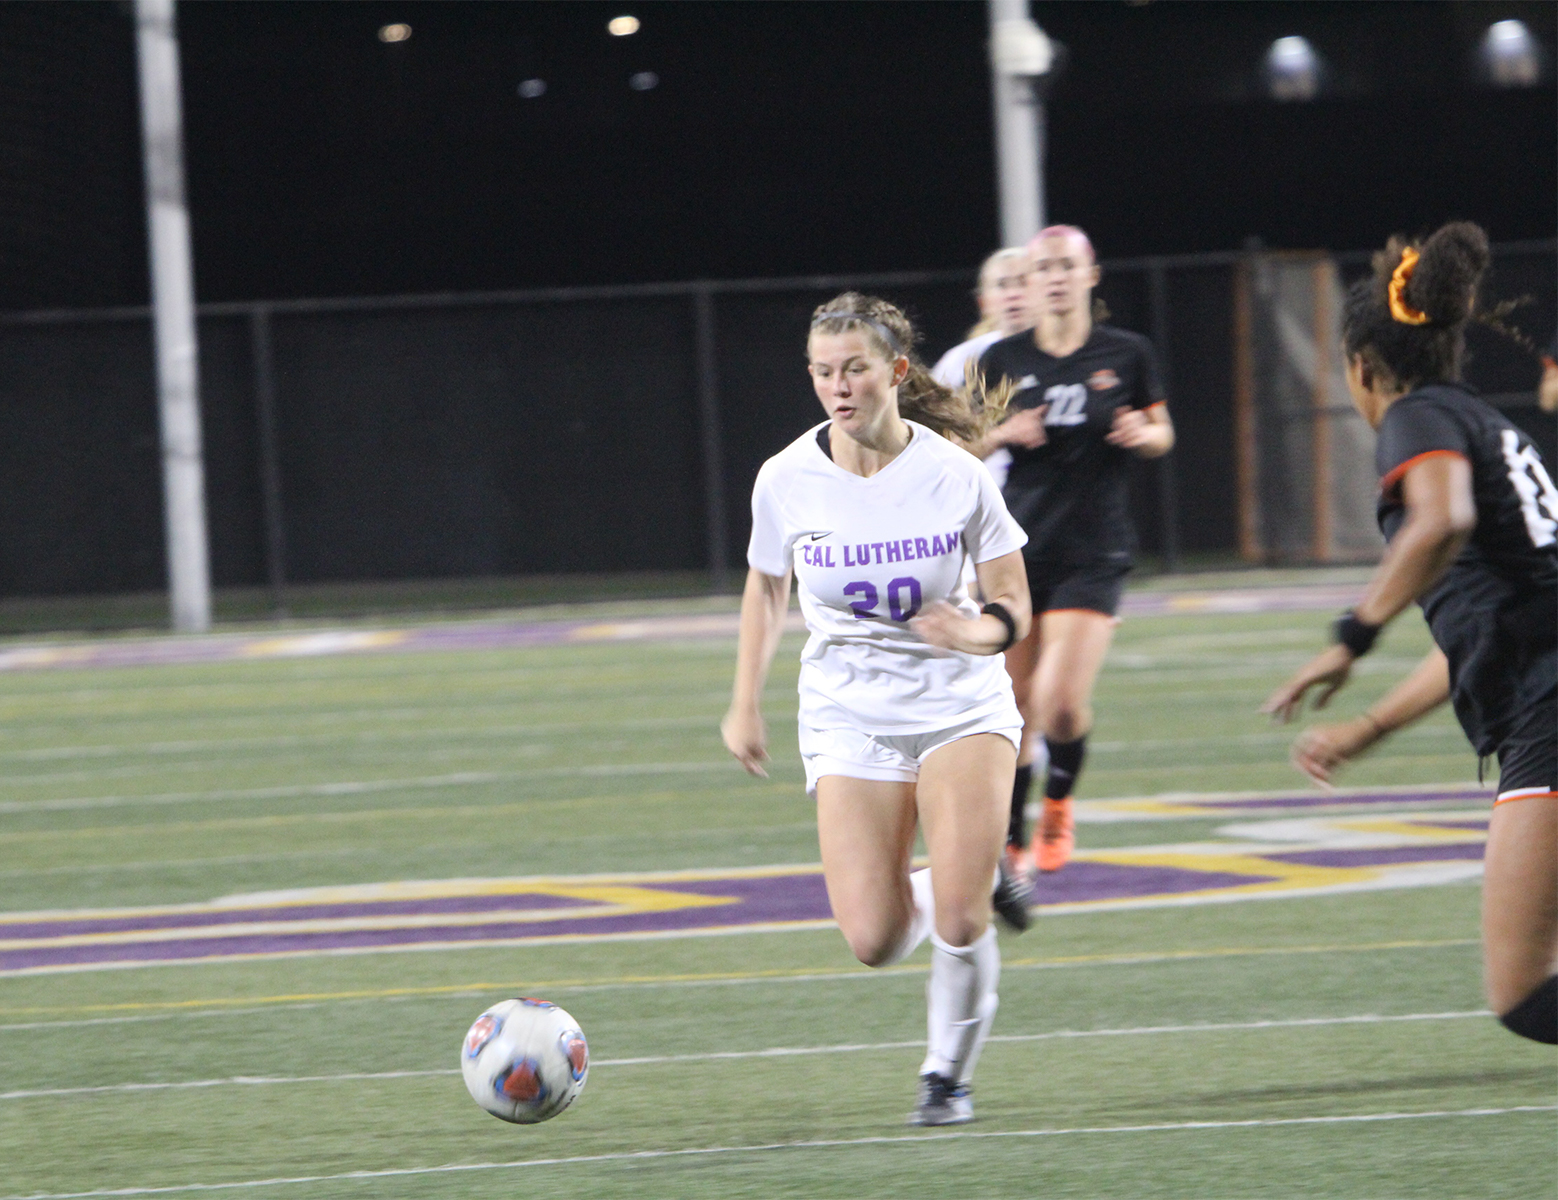 Regals Shutout Tigers to Earn Second Straight Win